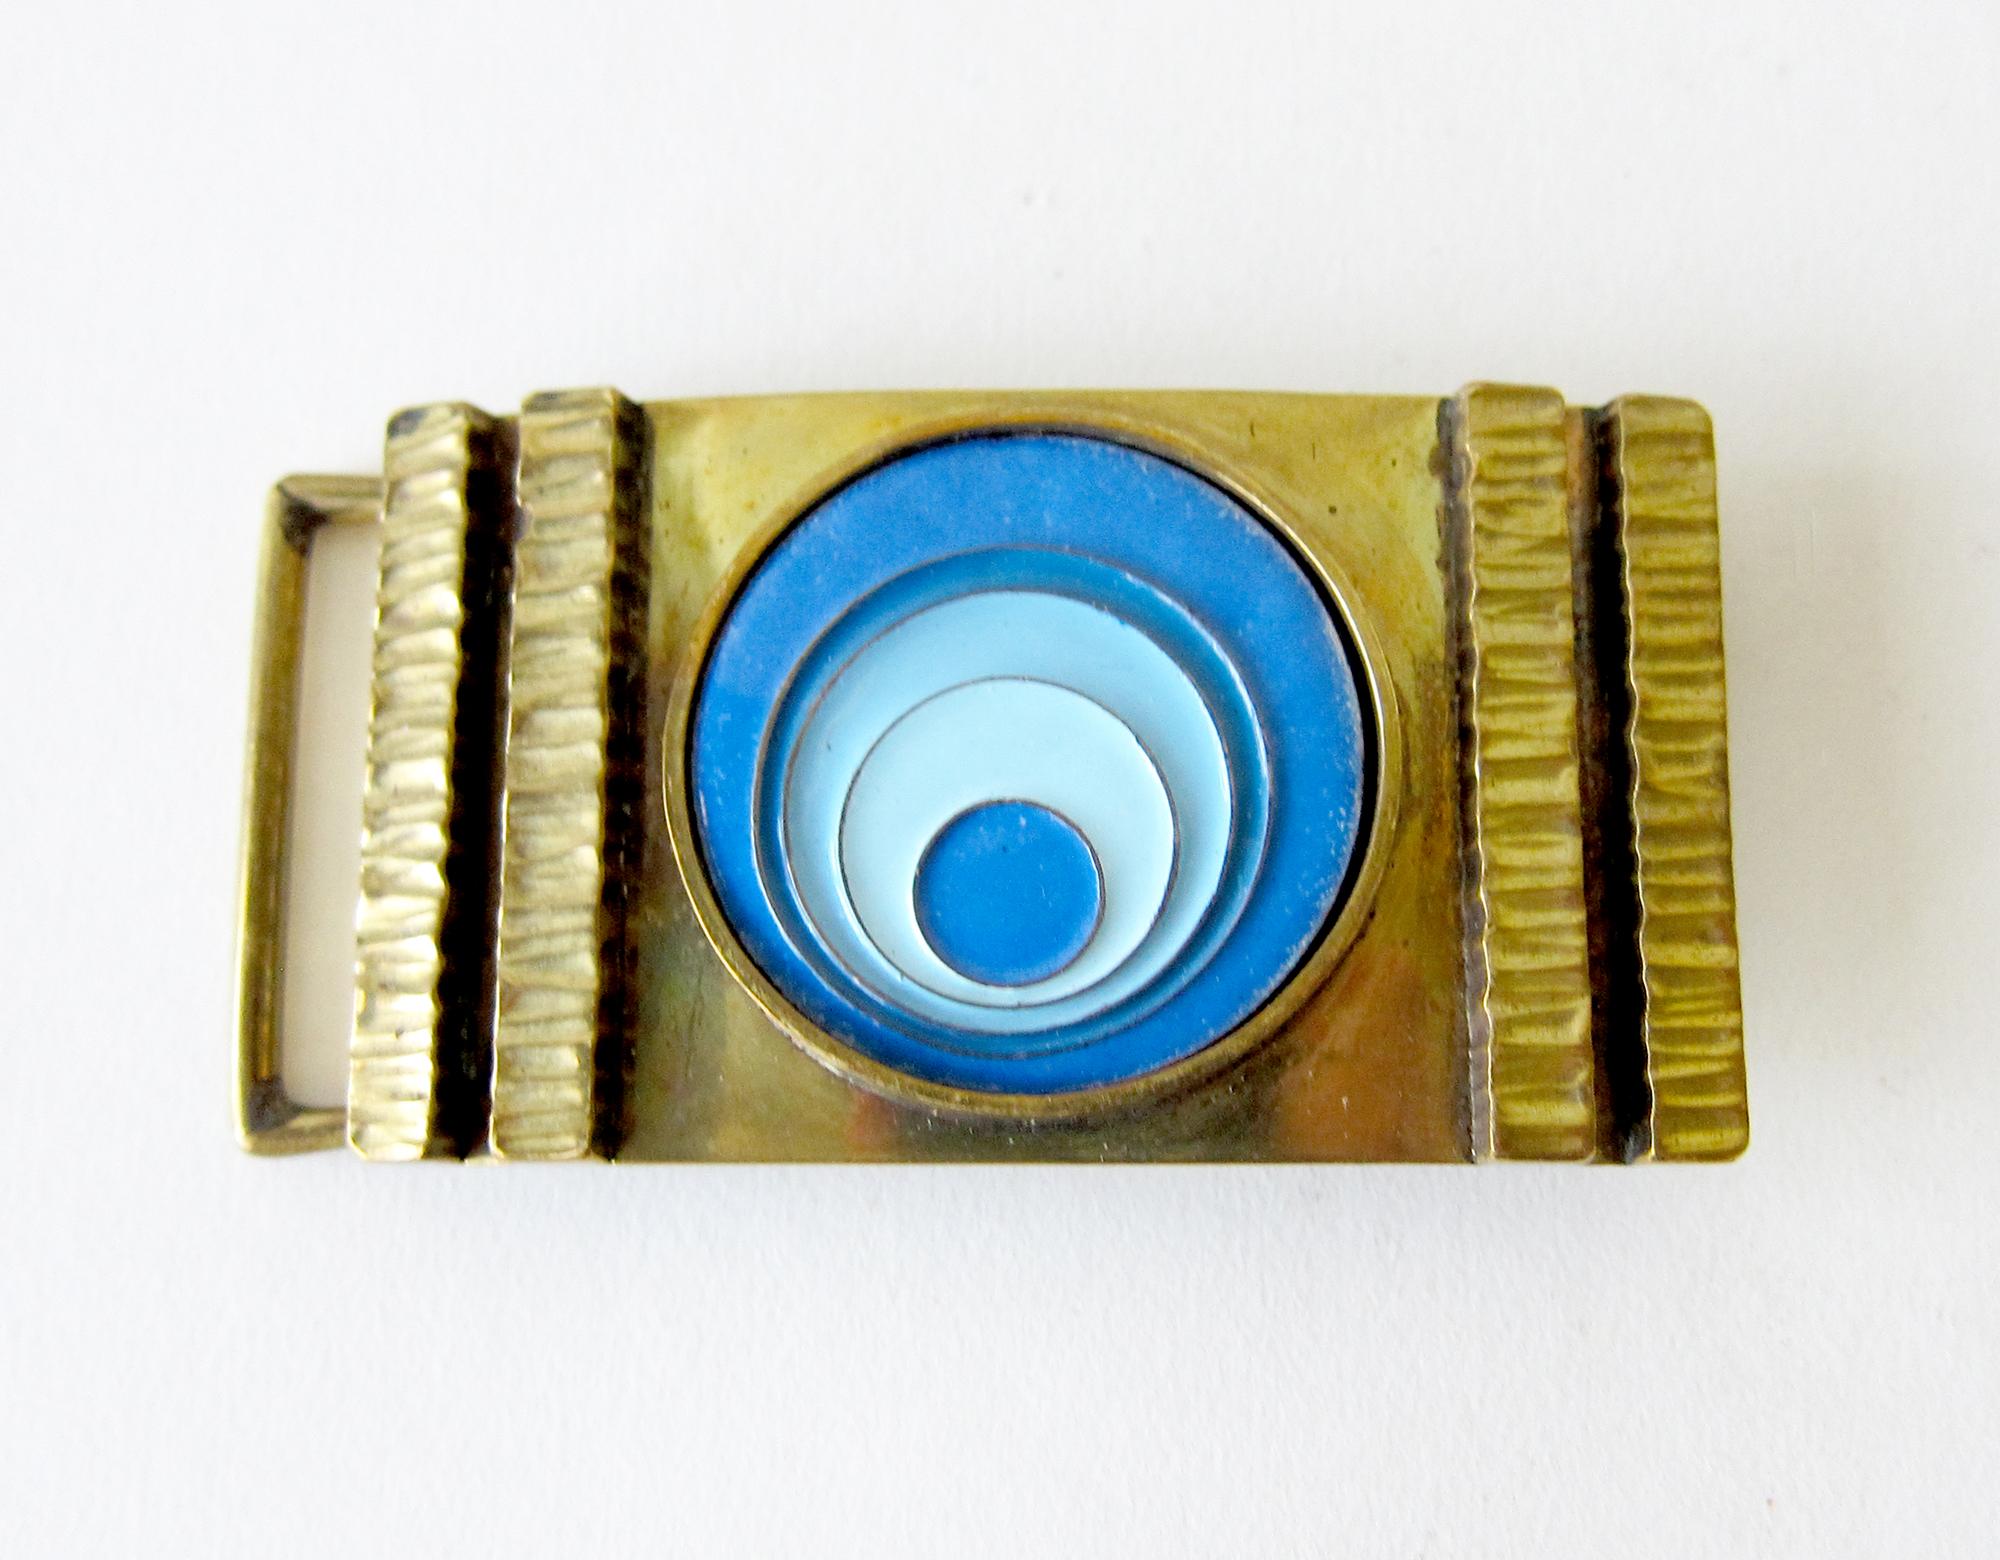 1970's bronze belt buckle with psychedelic modern enamel design, created by James Frappe of Pittsburgh, Pennsylvania.  Buckle measures 1 7/8